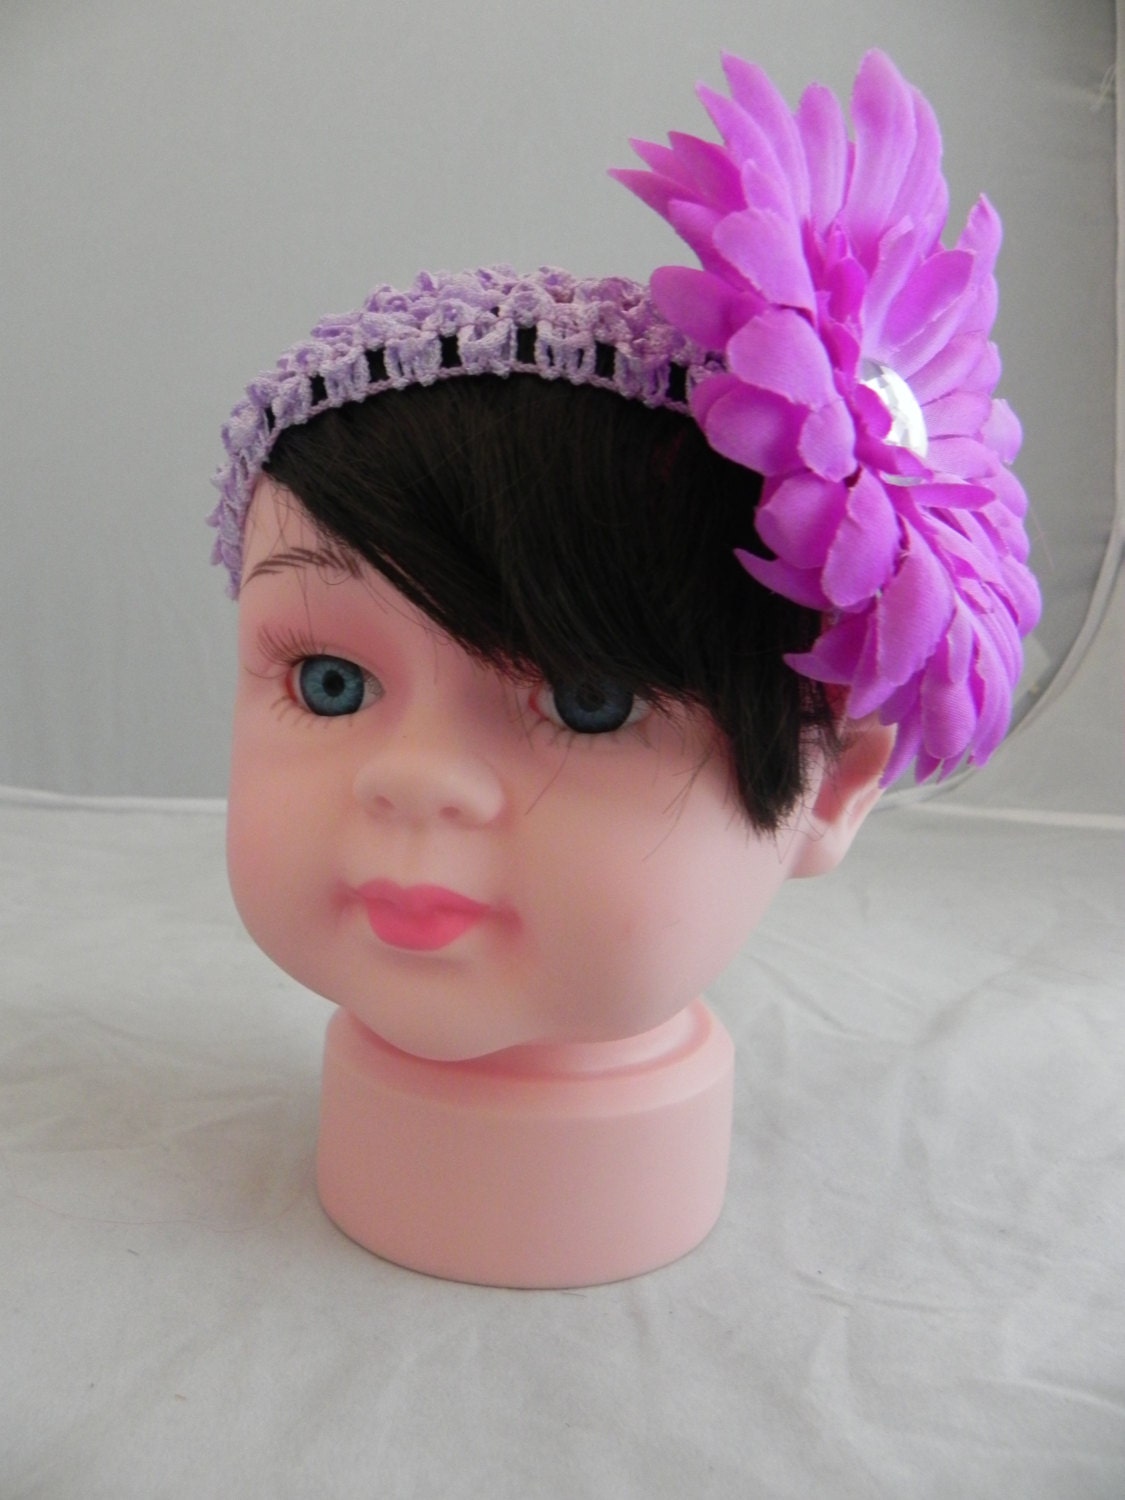 59 New baby headband extensions 602 Items similar to Baby Bangs   Headband with Hair Extensions for Little   